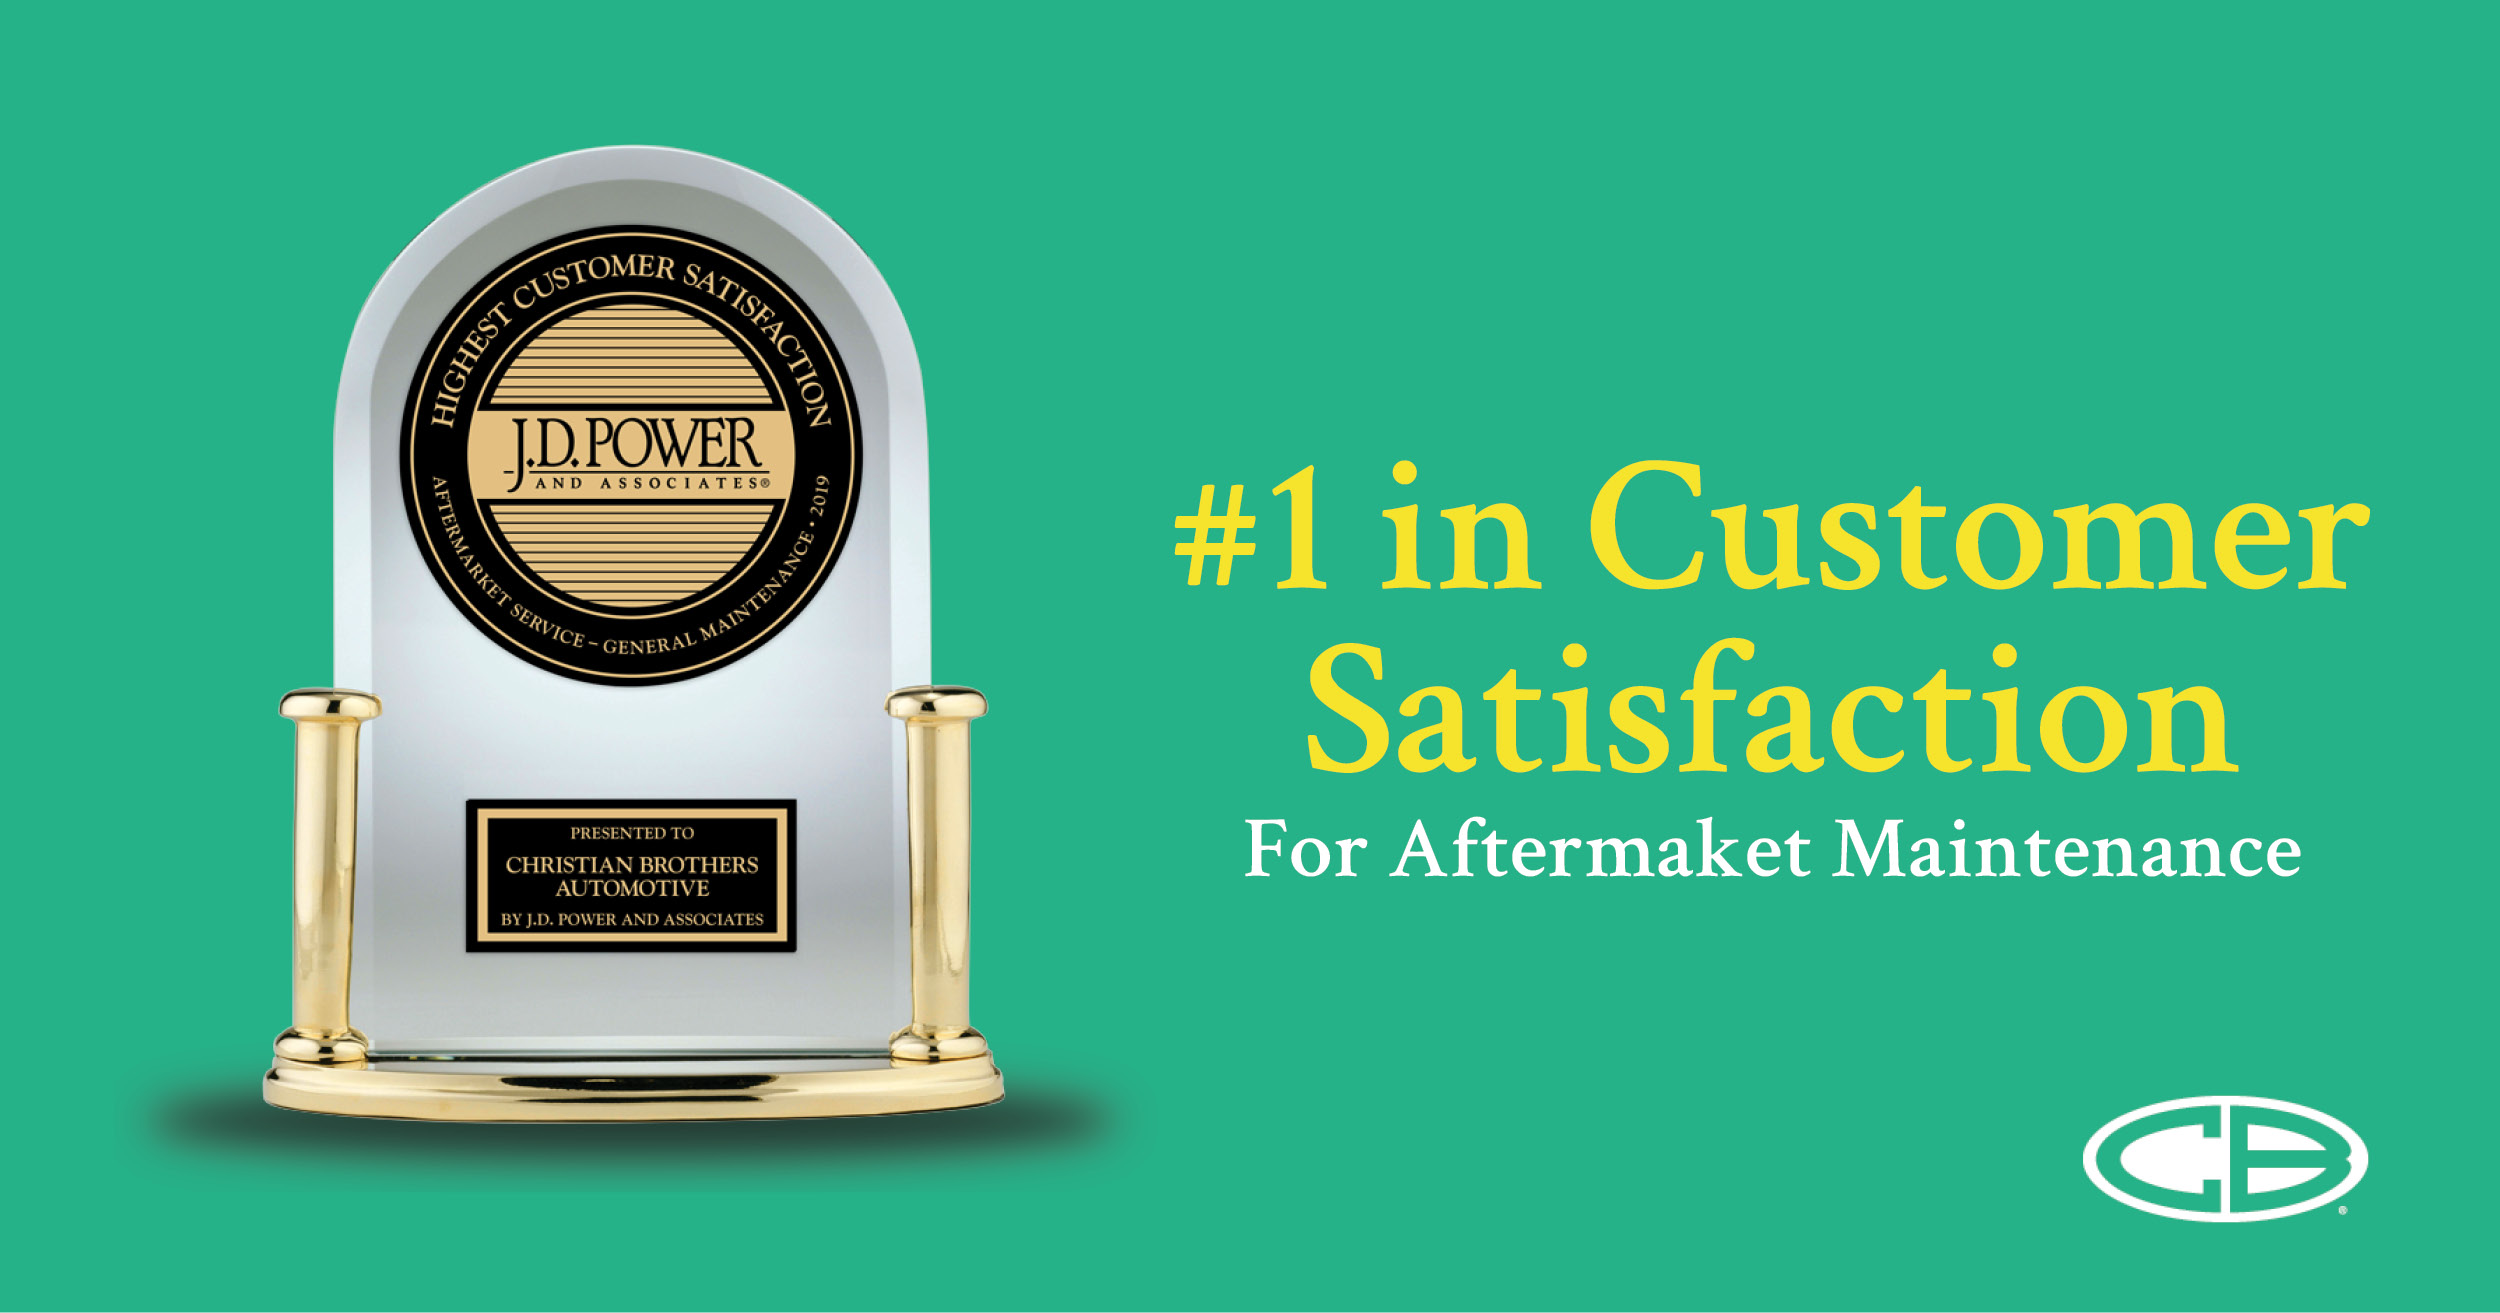 J.D. Power names Christian Brothers Automotive #1 in Customer Satisfaction for Aftermarket General Maintenance